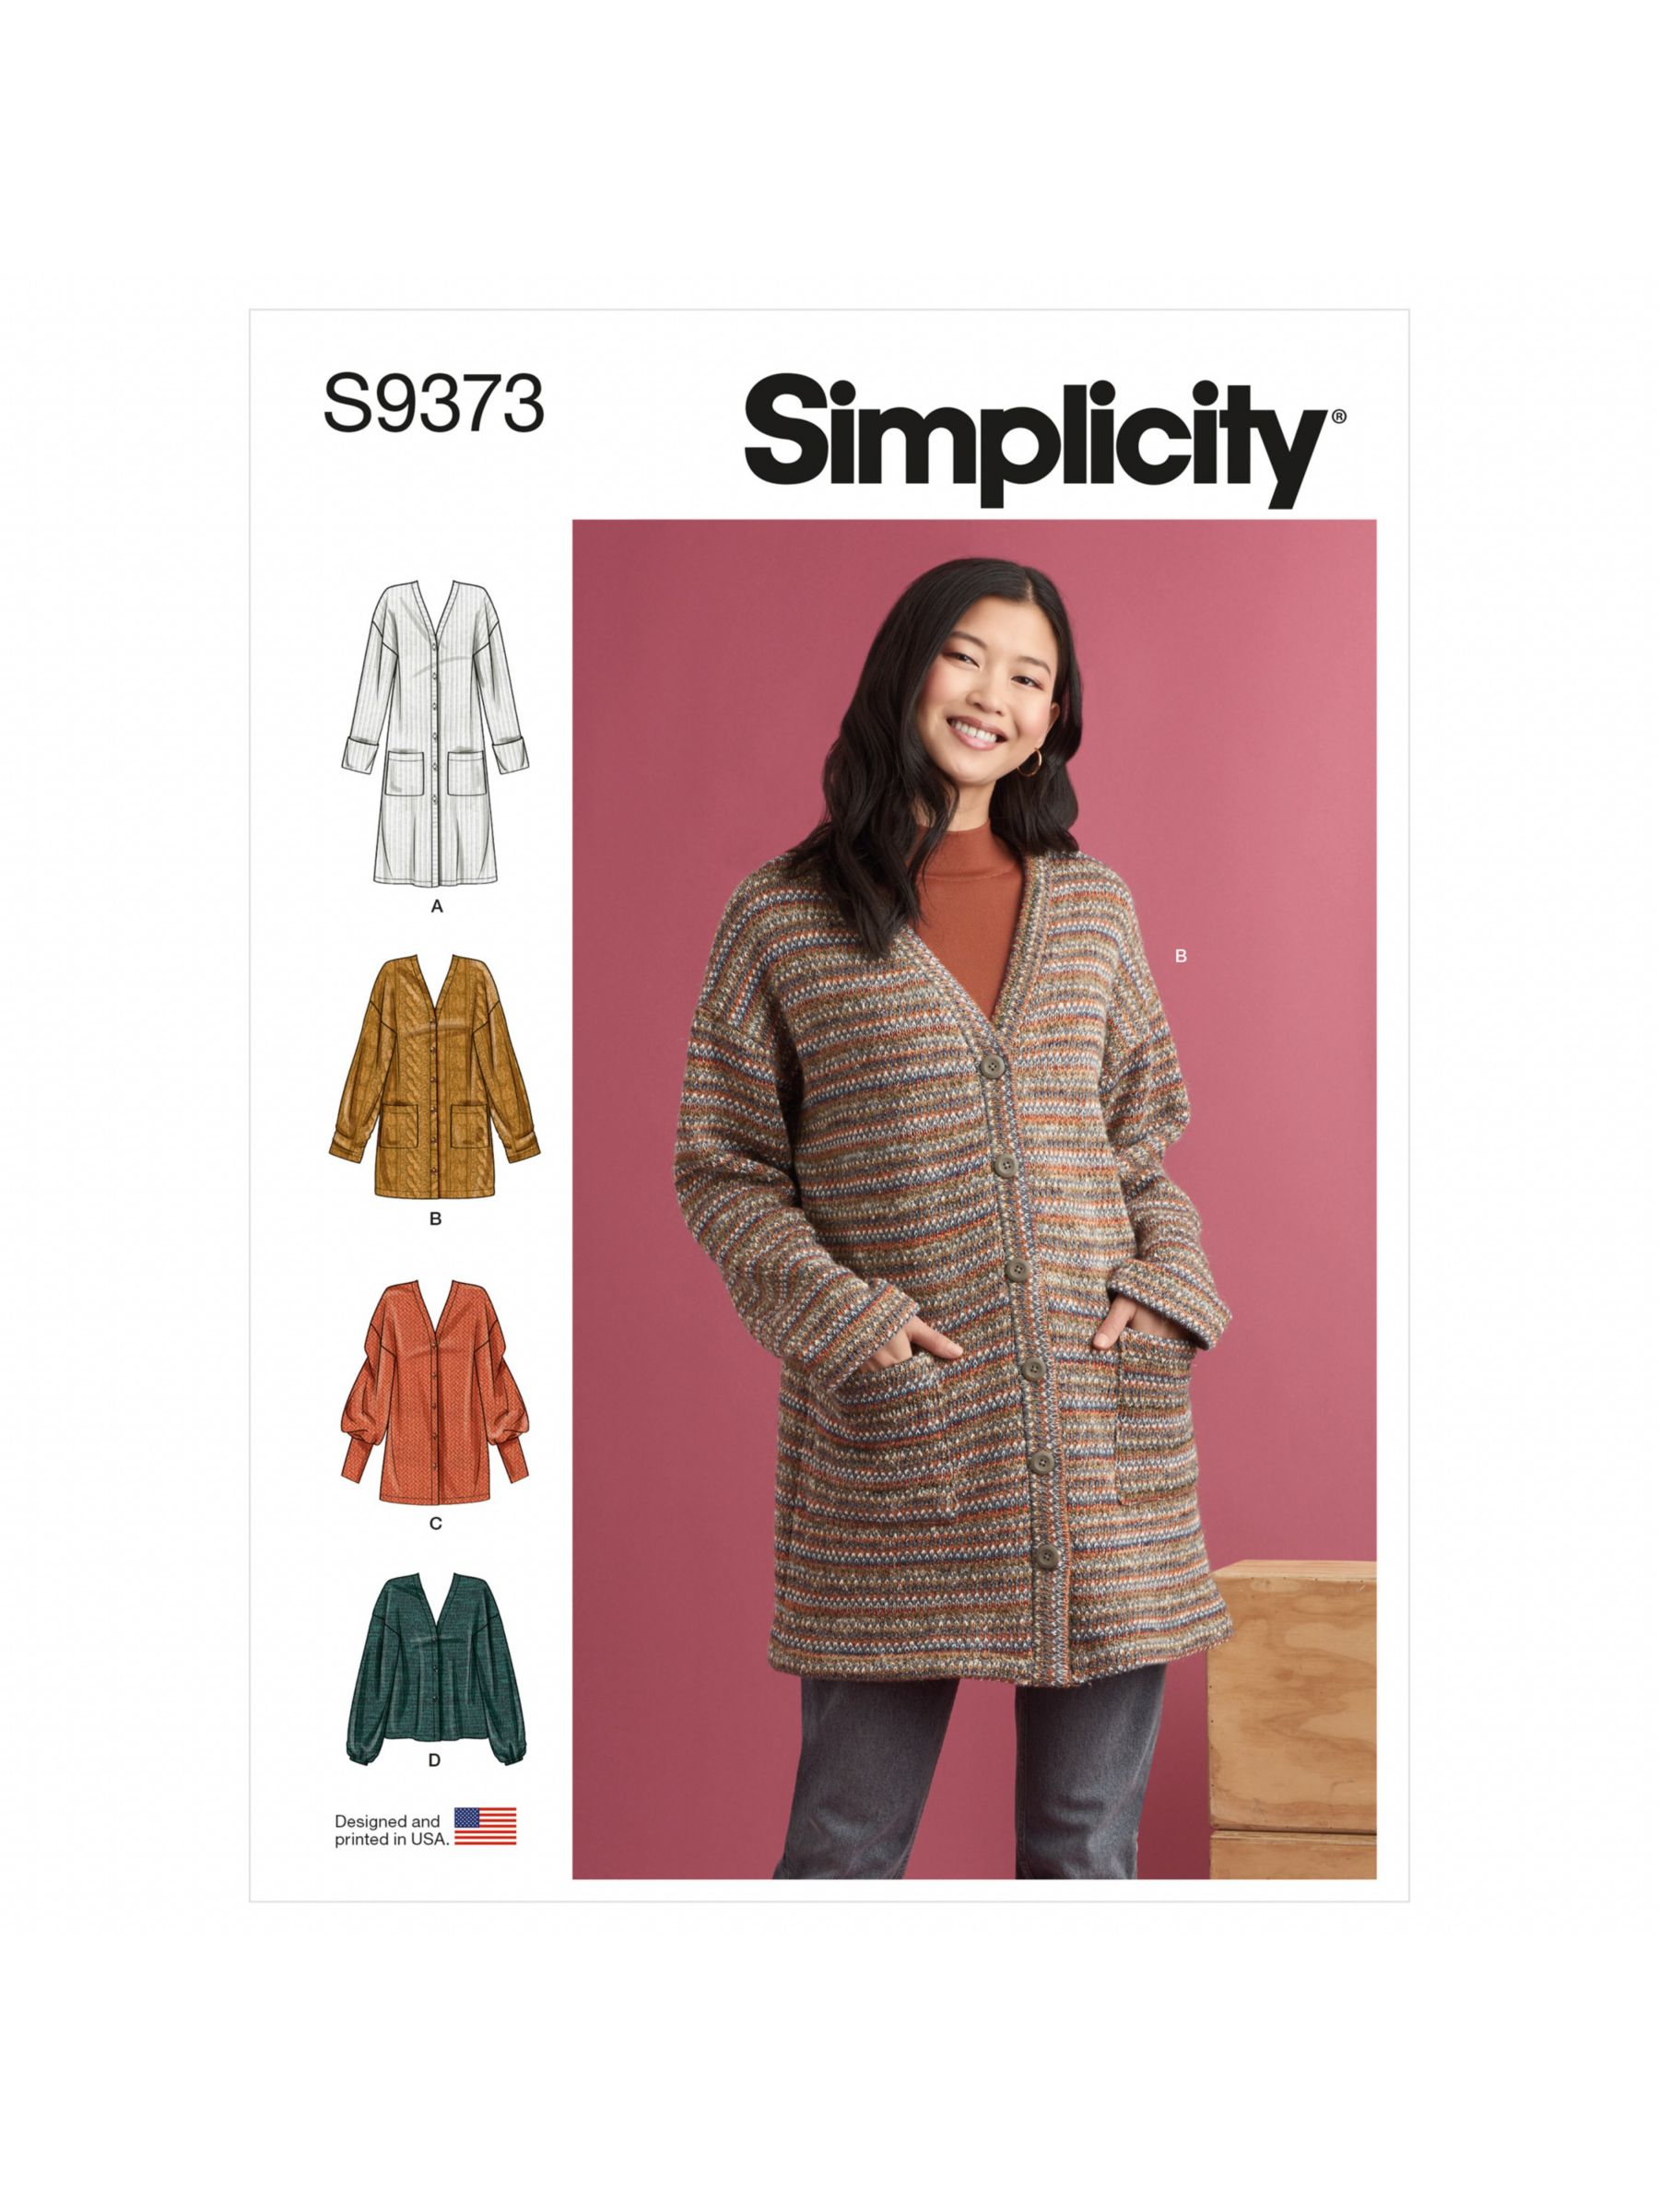 Simplicity Misses' Oversized Knit Cardigans Sewing Pattern, S9373, A